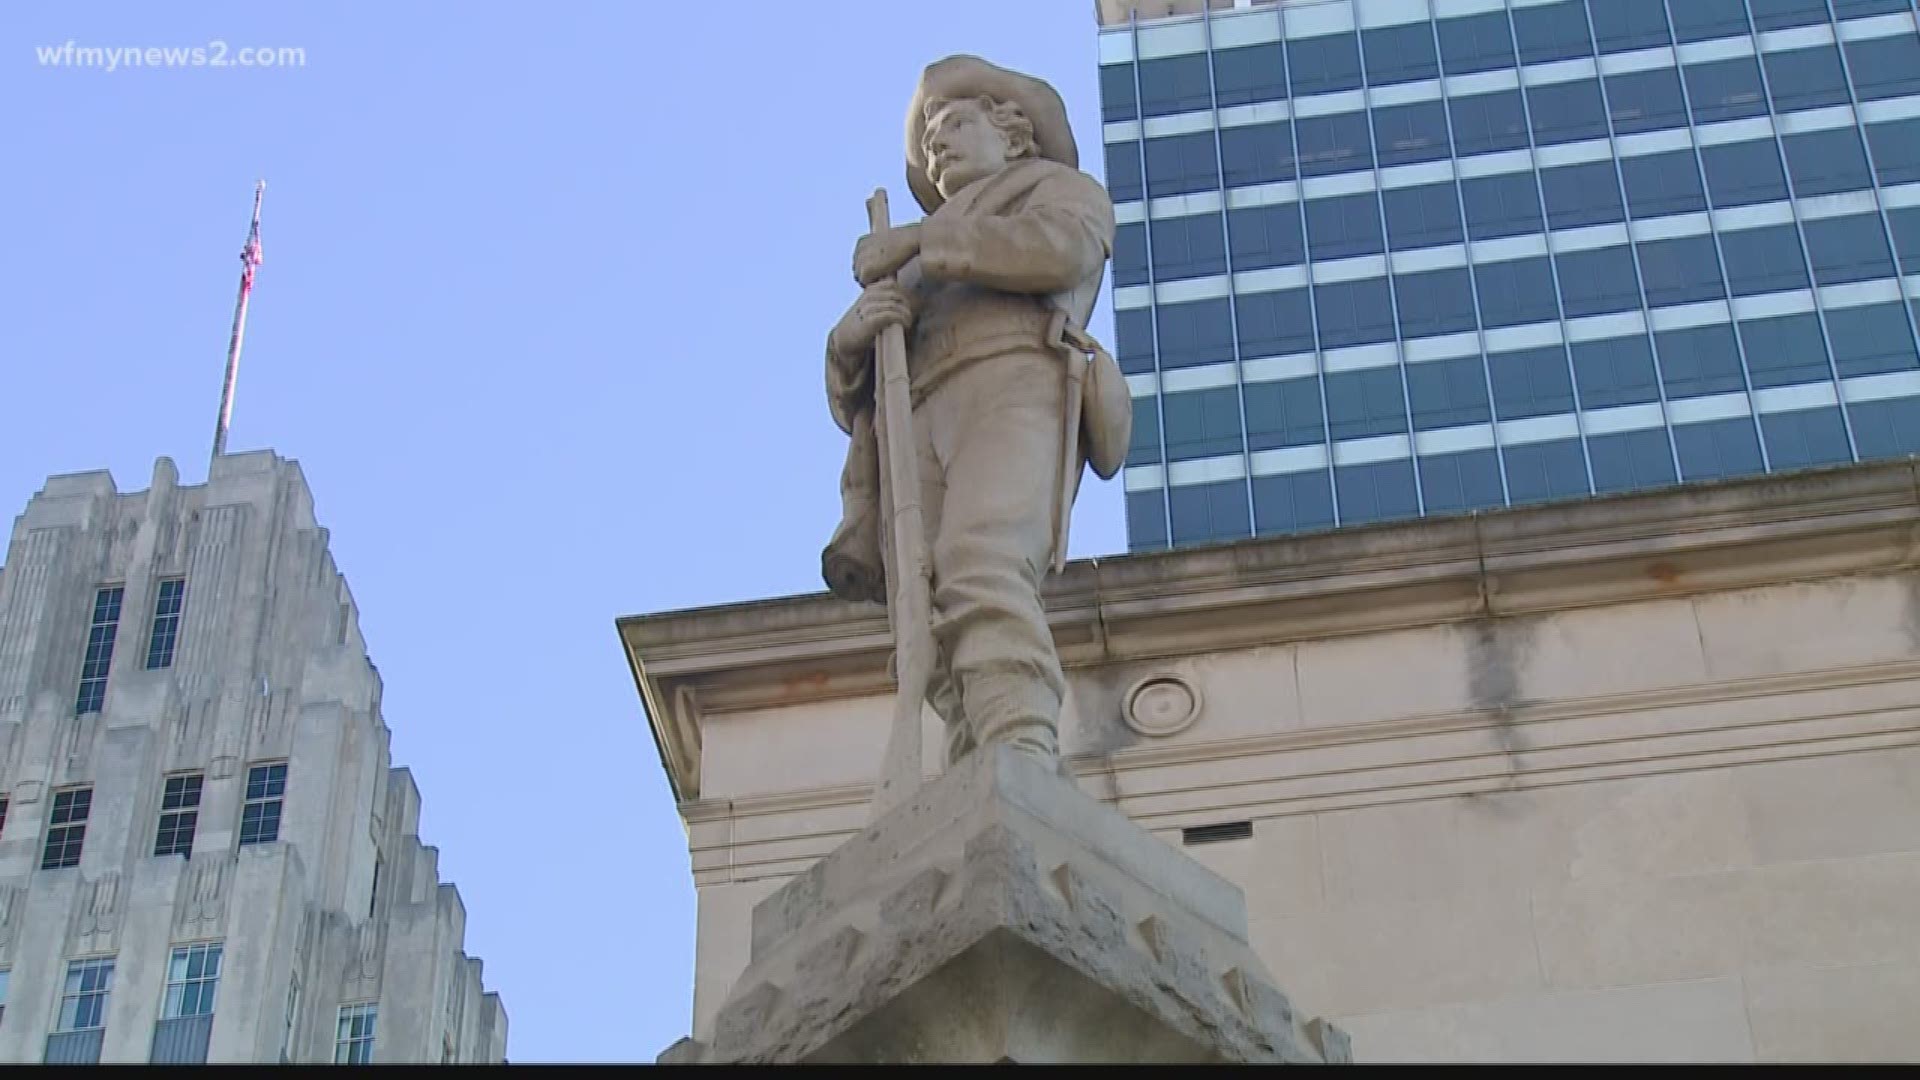 The city says contractors made an evaluation to ensure the statue will be removed safely and fully preserved.